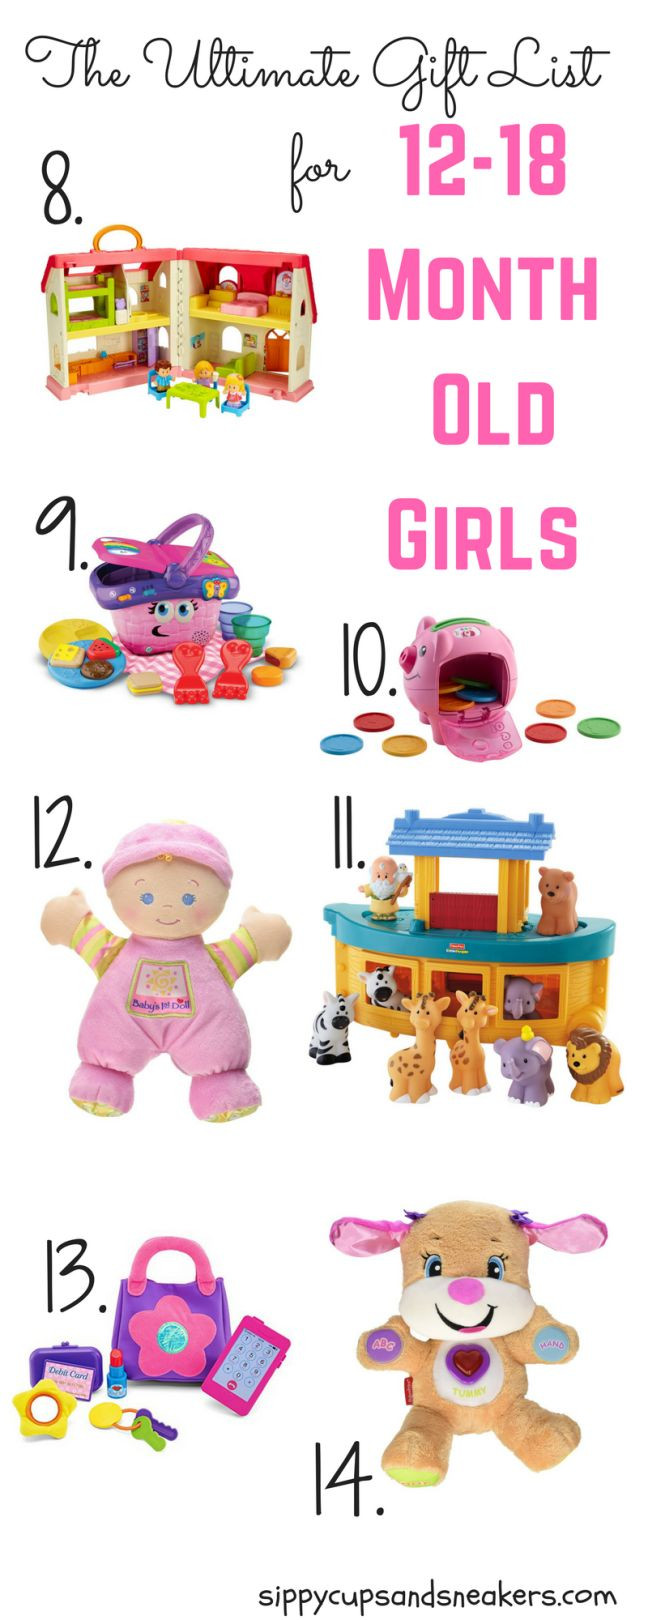 Best Gifts For 9 Month Old Baby Girl
 The Ultimate Gift List for 12 18 Month Old Girls